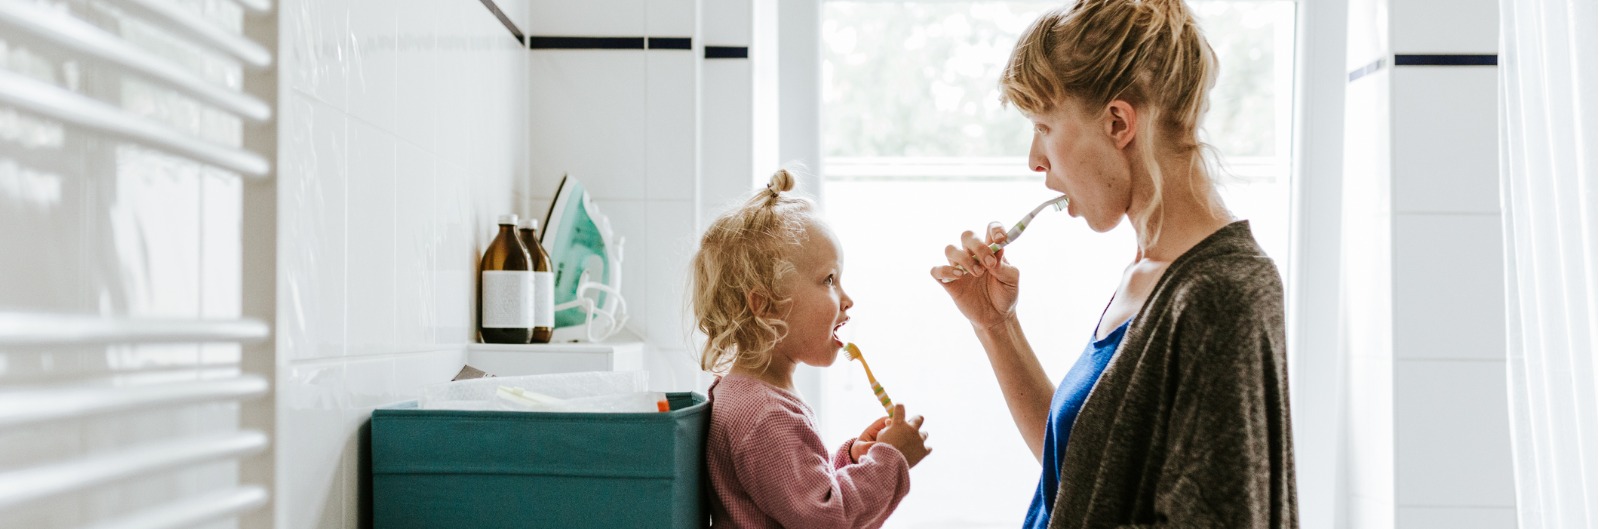 "young-mother-with-a-child-brushing-teeth-in-the-morning